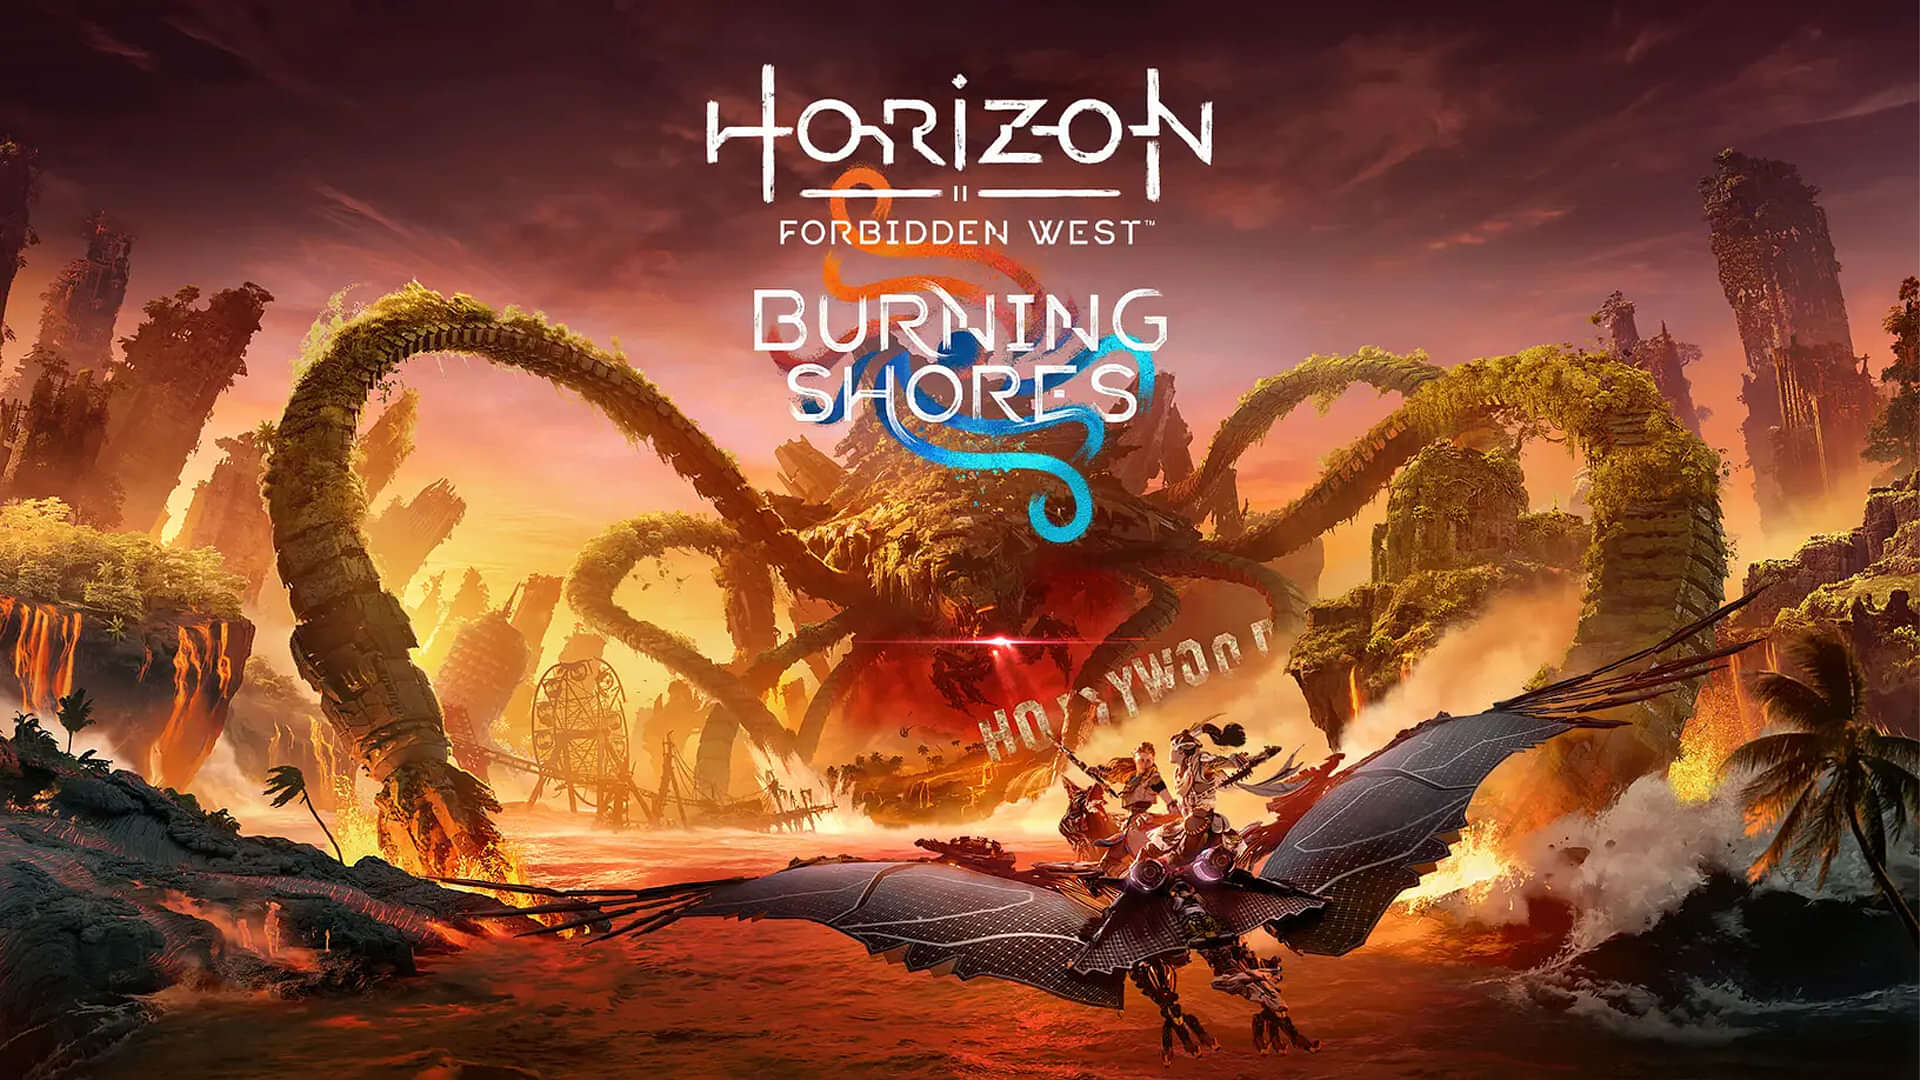 The Horizon Forbidden West PC Port Should Come Sooner Rather Than Later